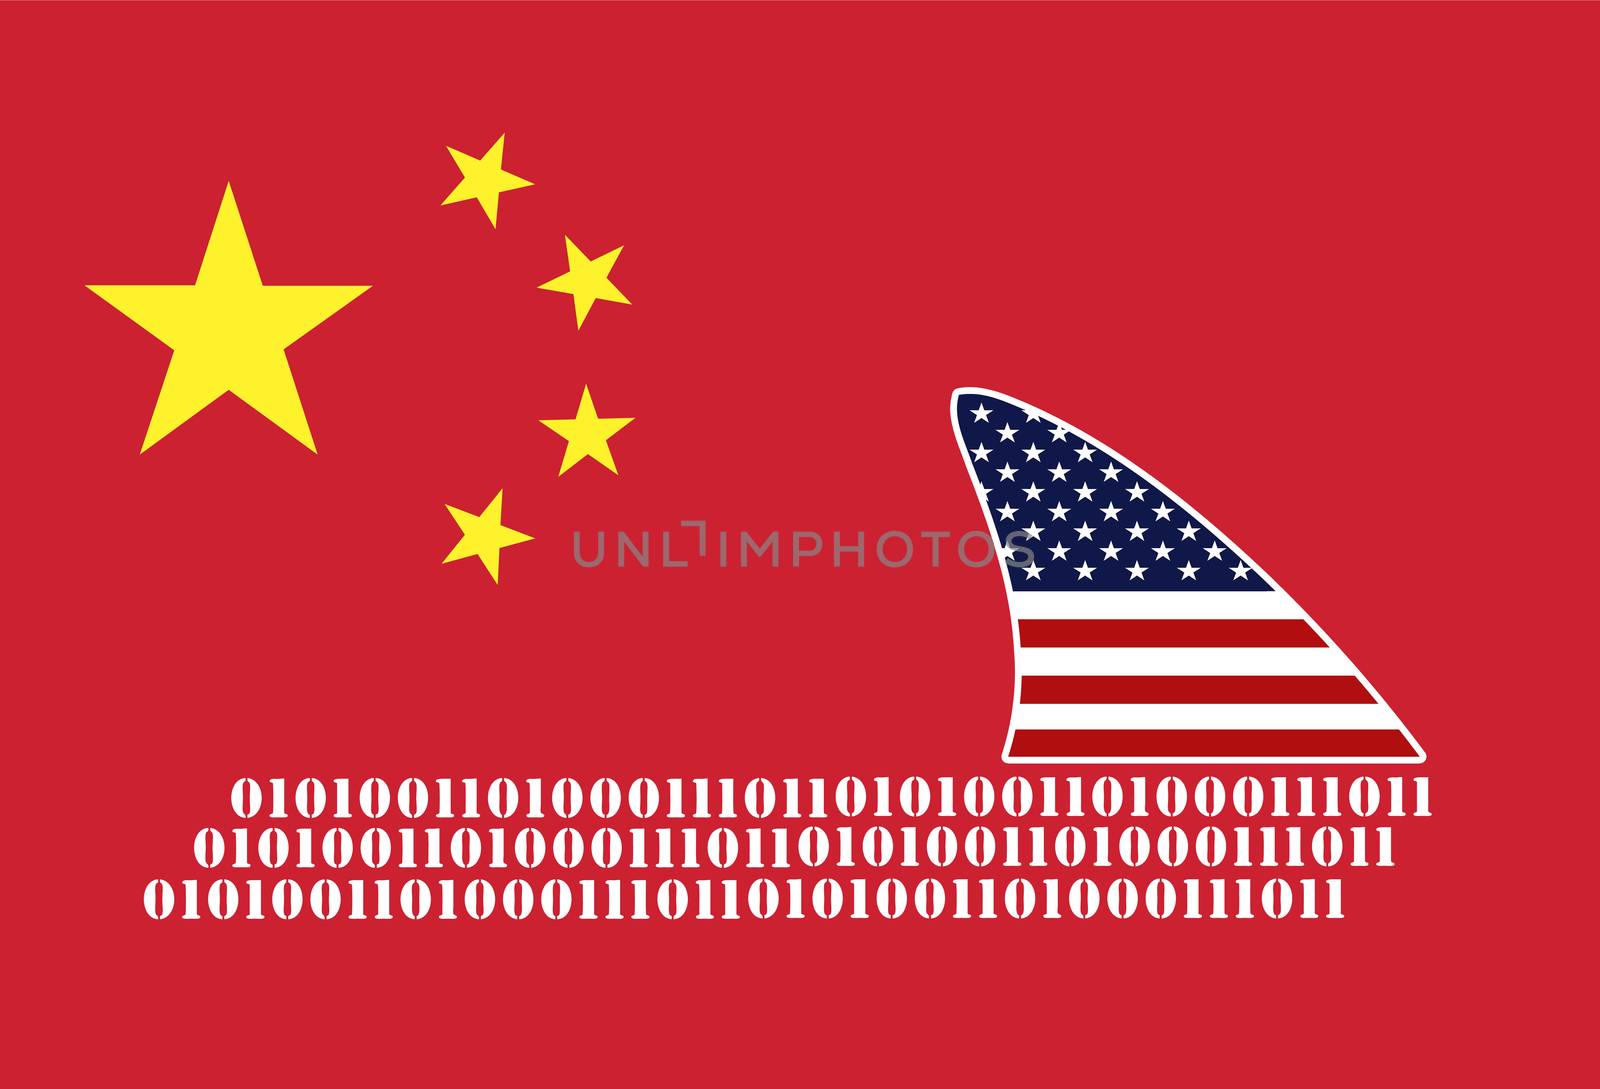 American espionage on Chinese computer networks

